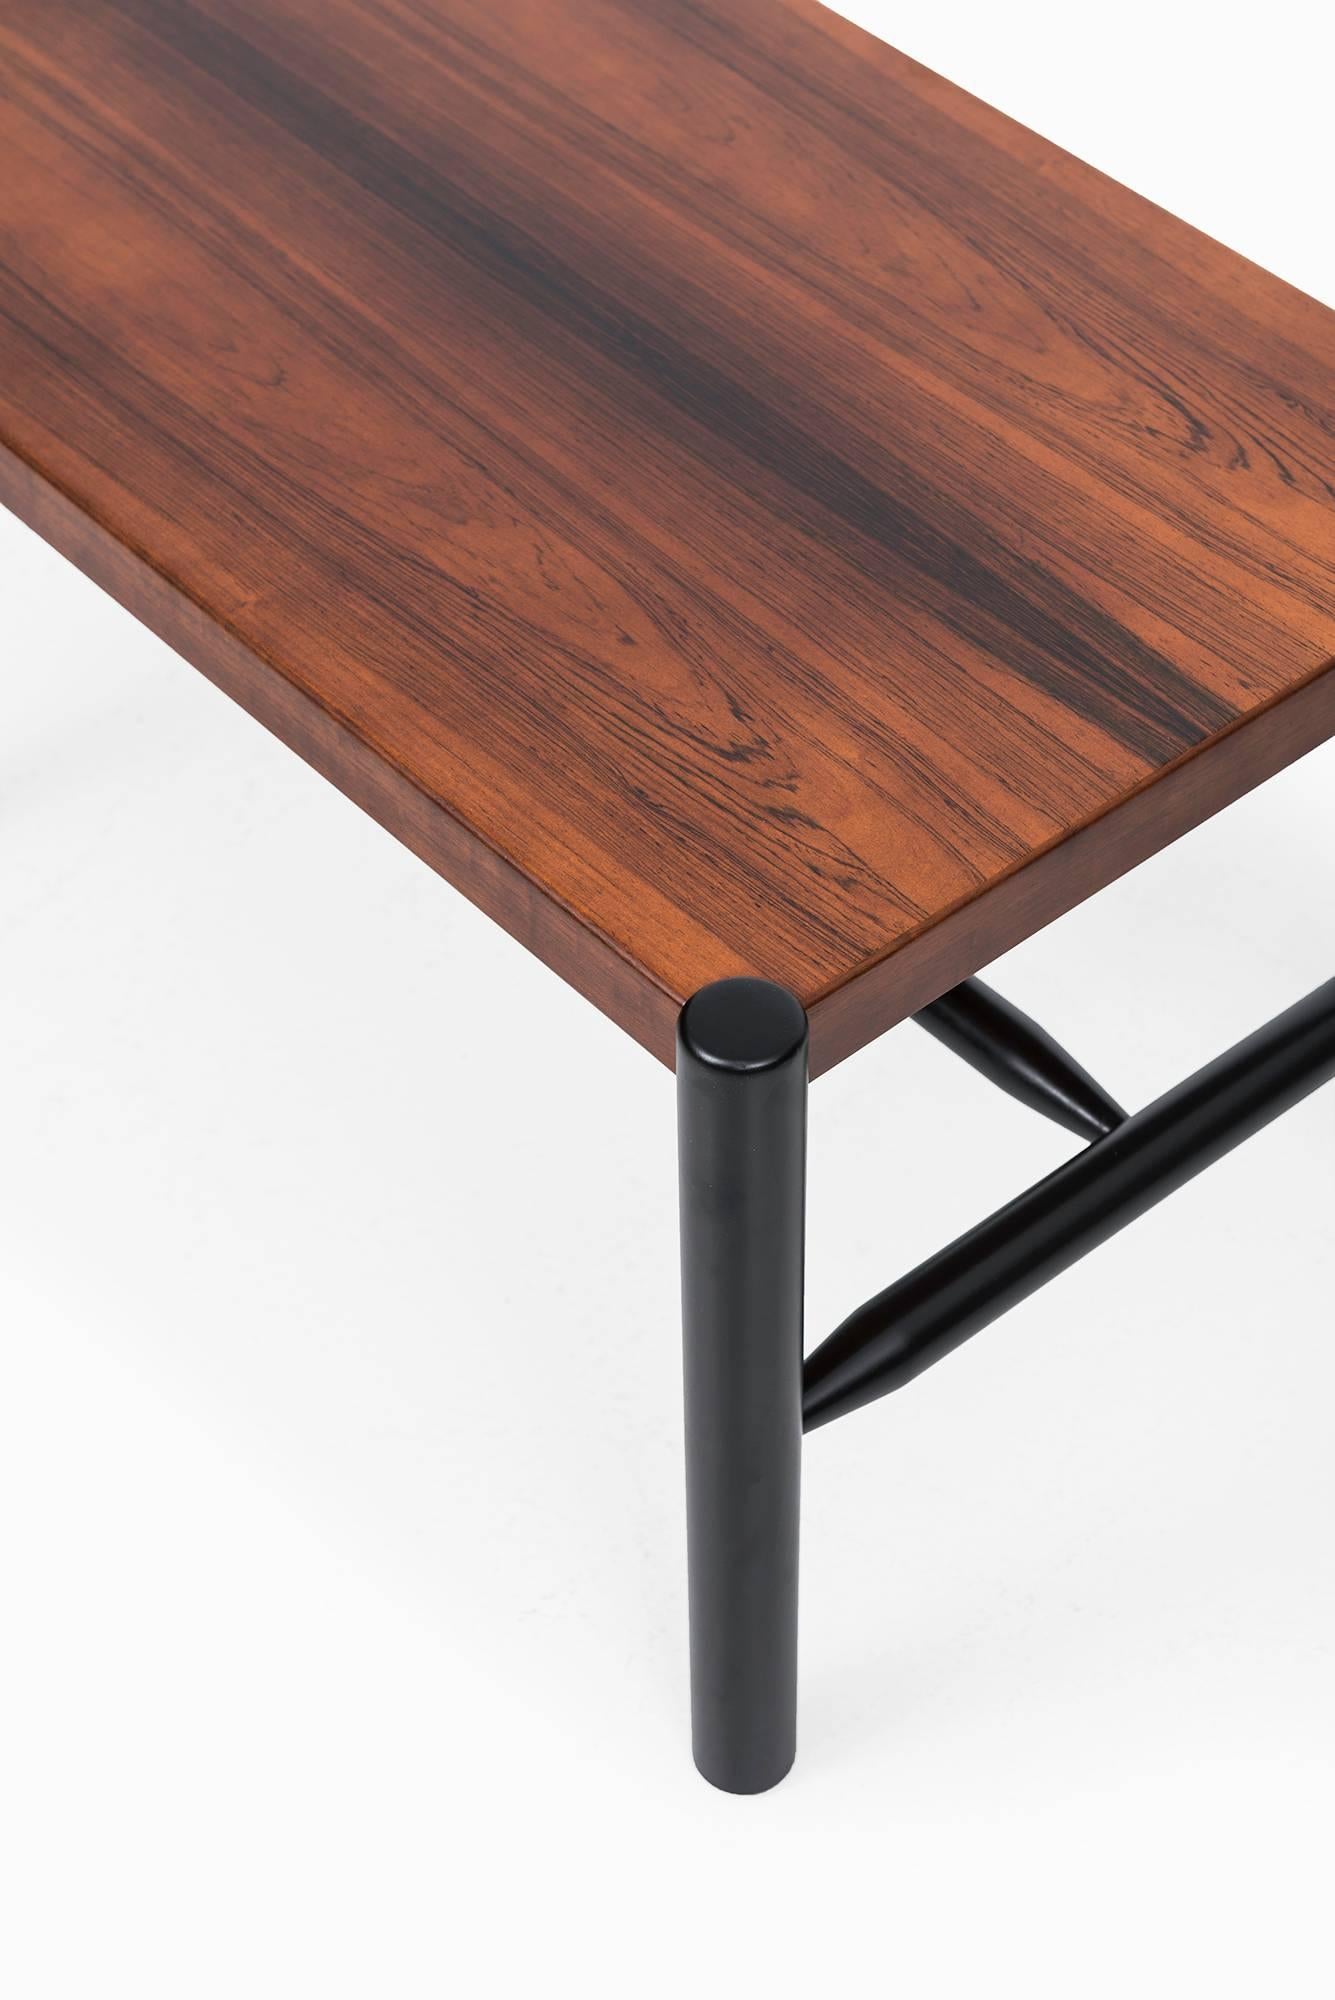 Arne Norell Side Tables in Rosewood and Black Lacquered Beech In Excellent Condition In Limhamn, Skåne län